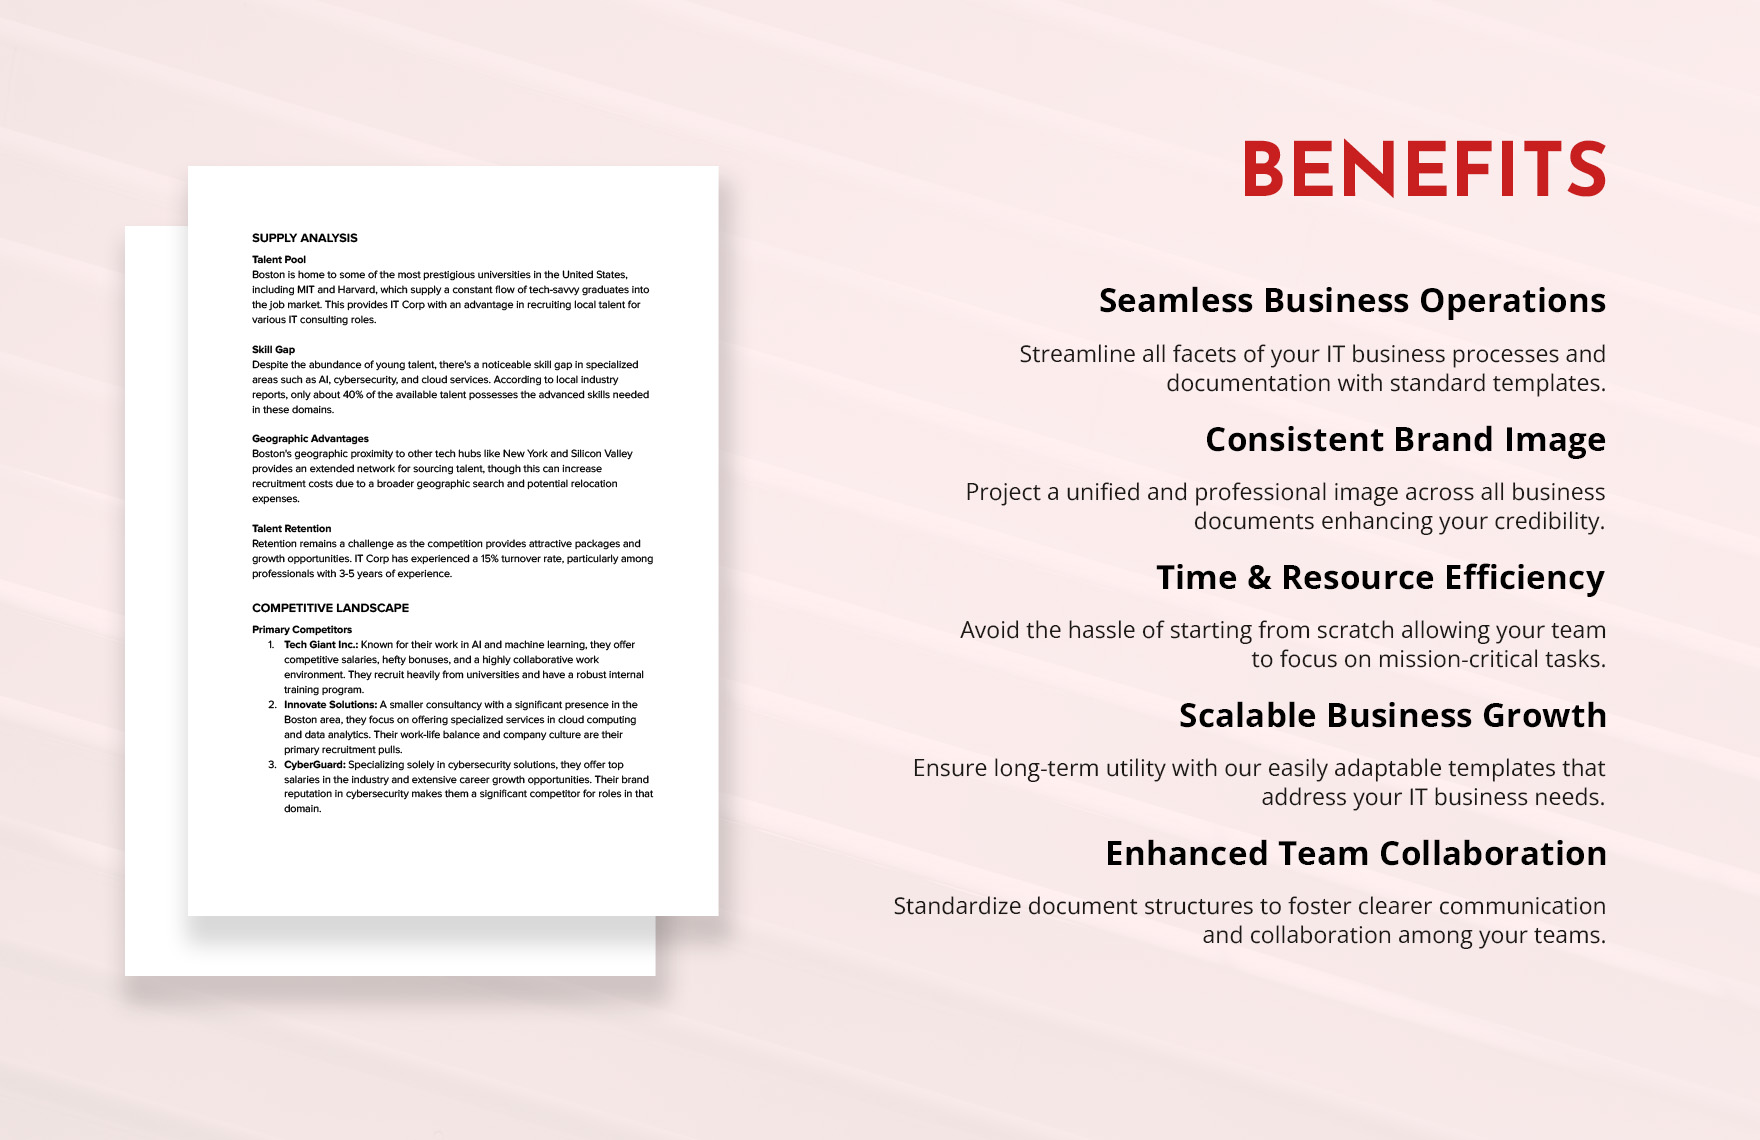 IT Consulting Recruitment Market Analysis Template